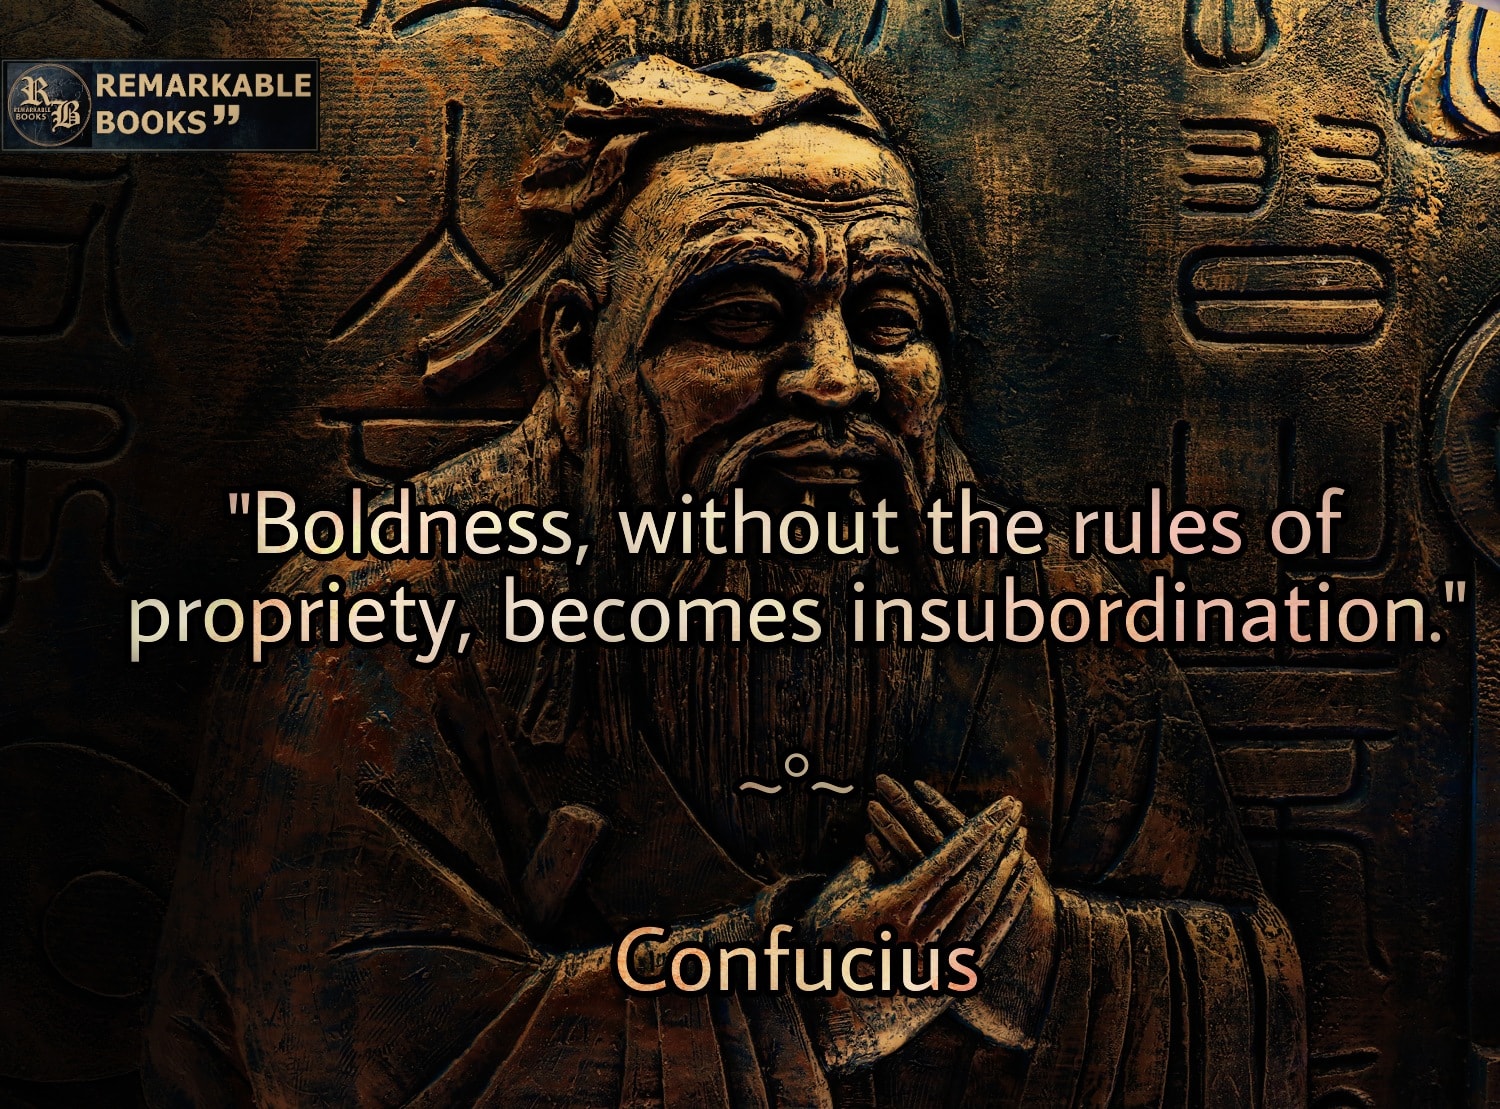 Boldness, without the rules of propriety, becomes insubordination.